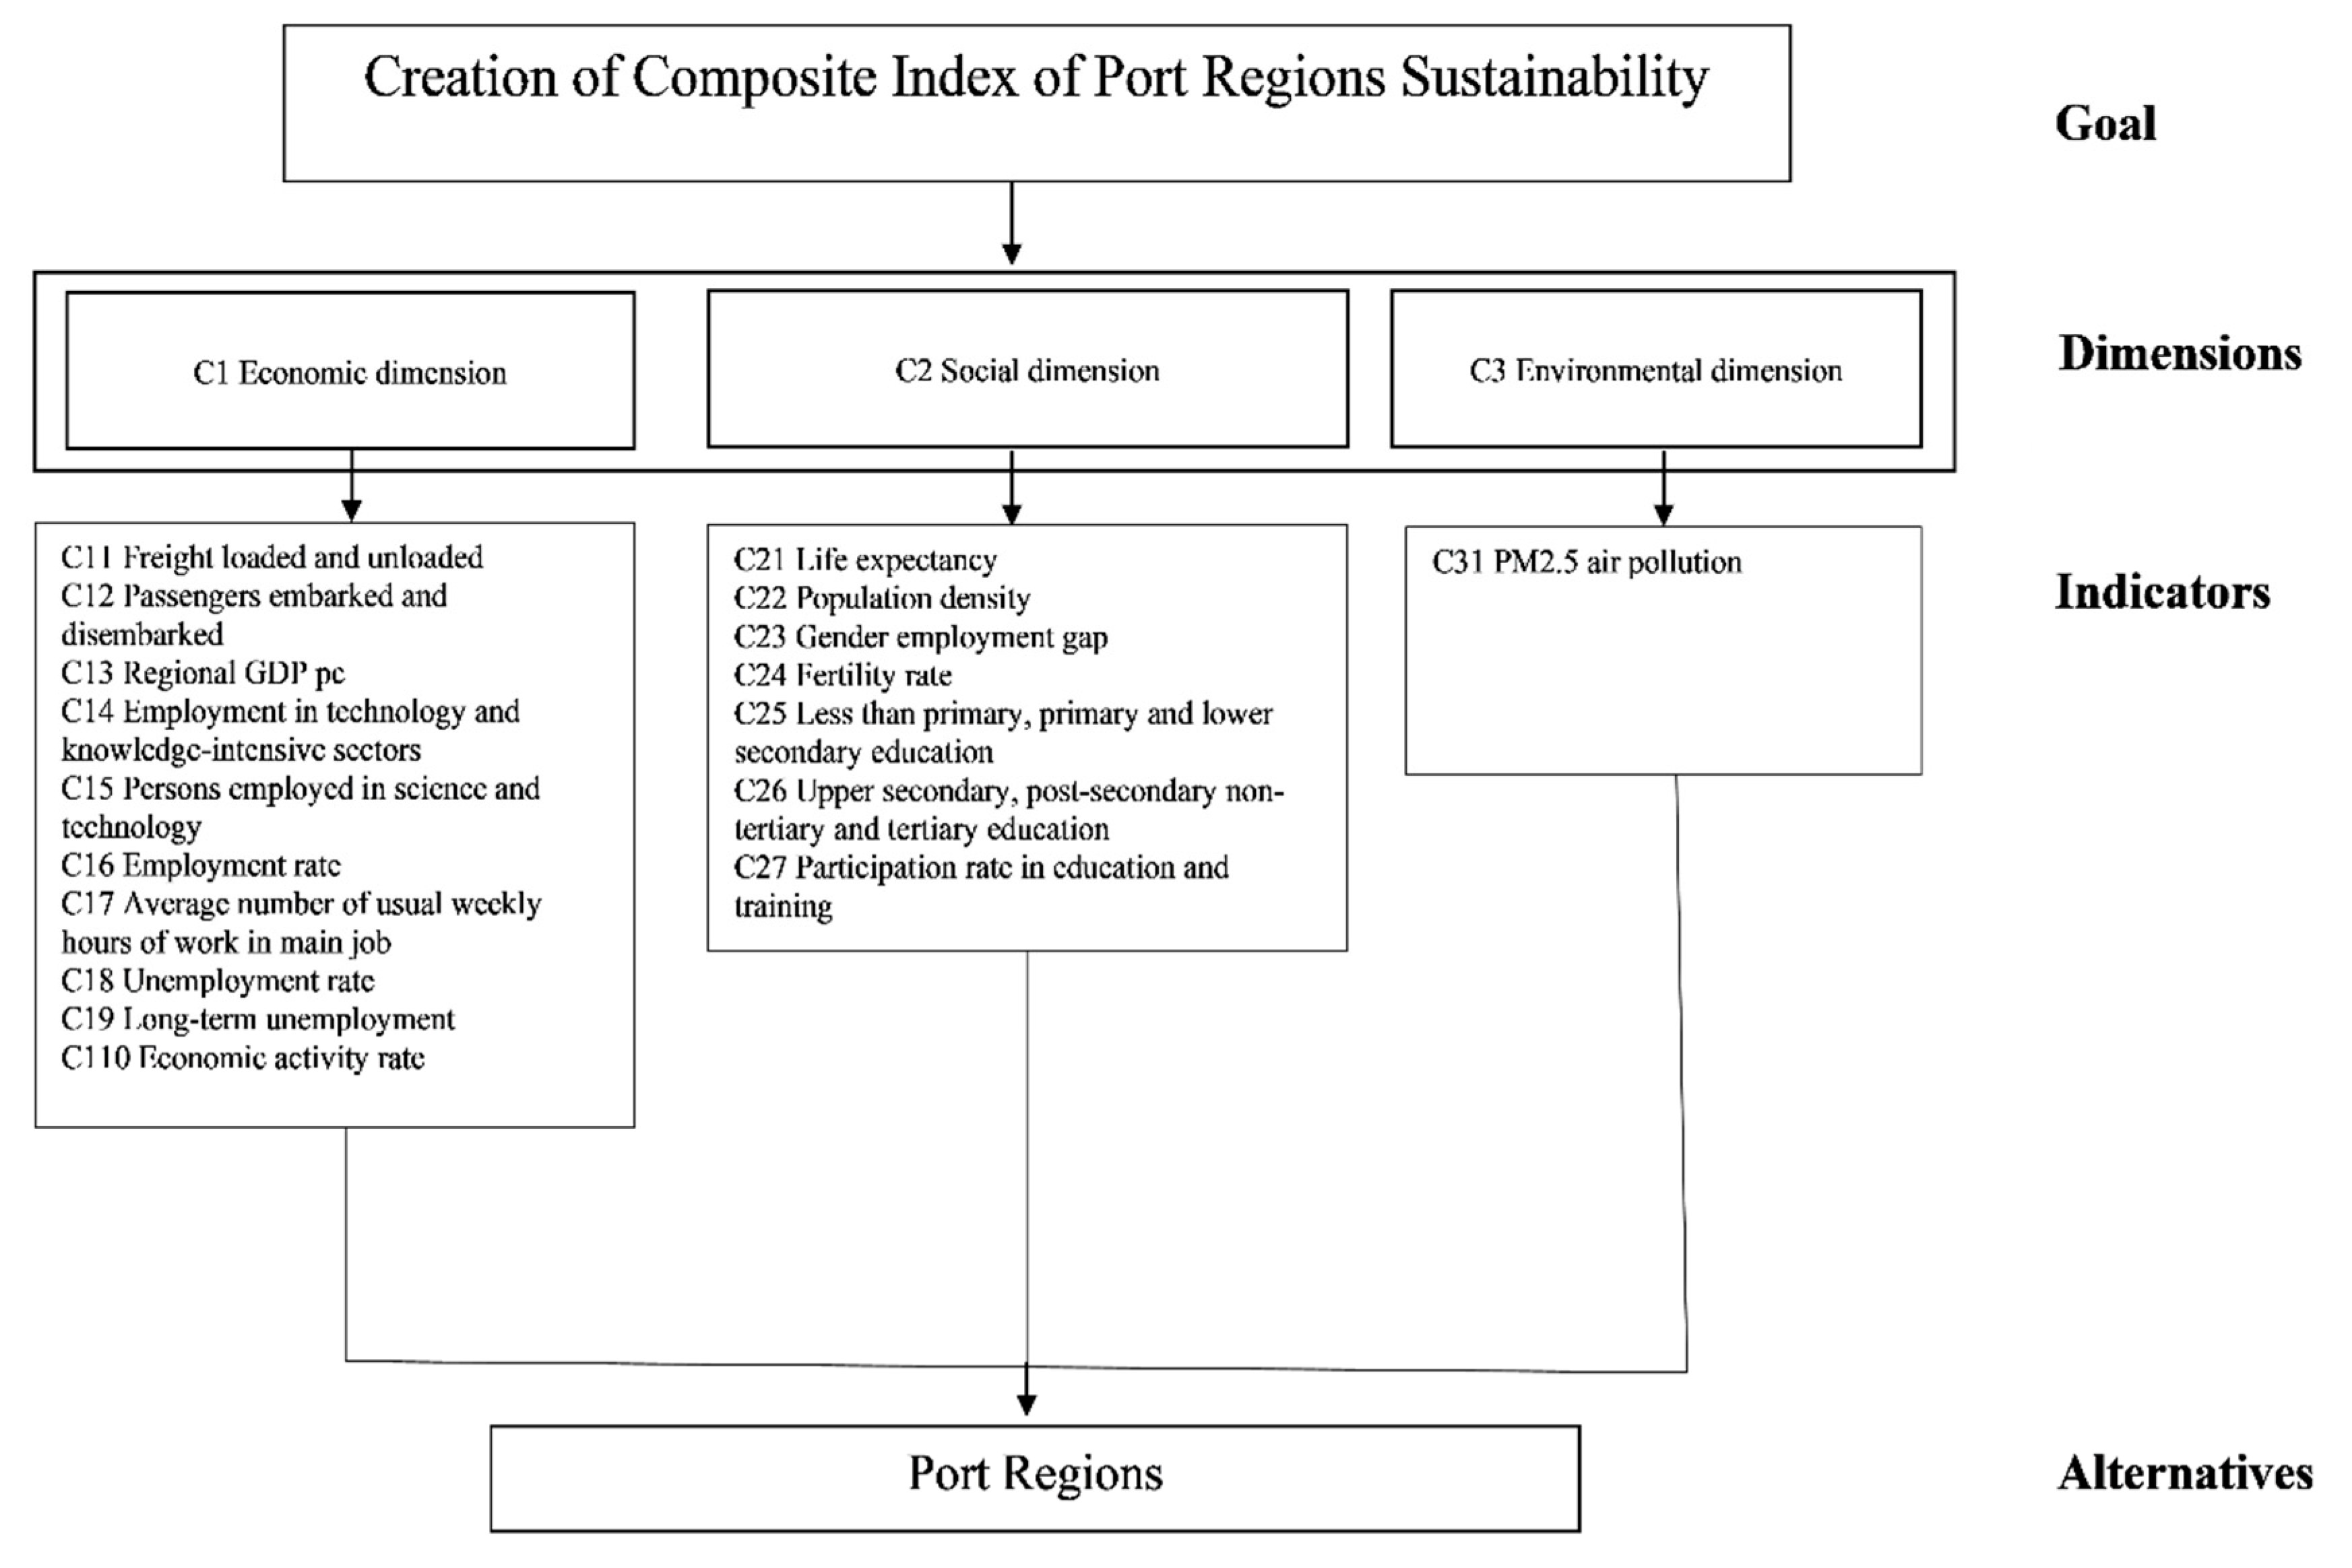 JMSE | Free Full-Text | Social, Economic and Environmental Sustainability  of Port Regions: MCDM Approach in Composite Index Creation | HTML